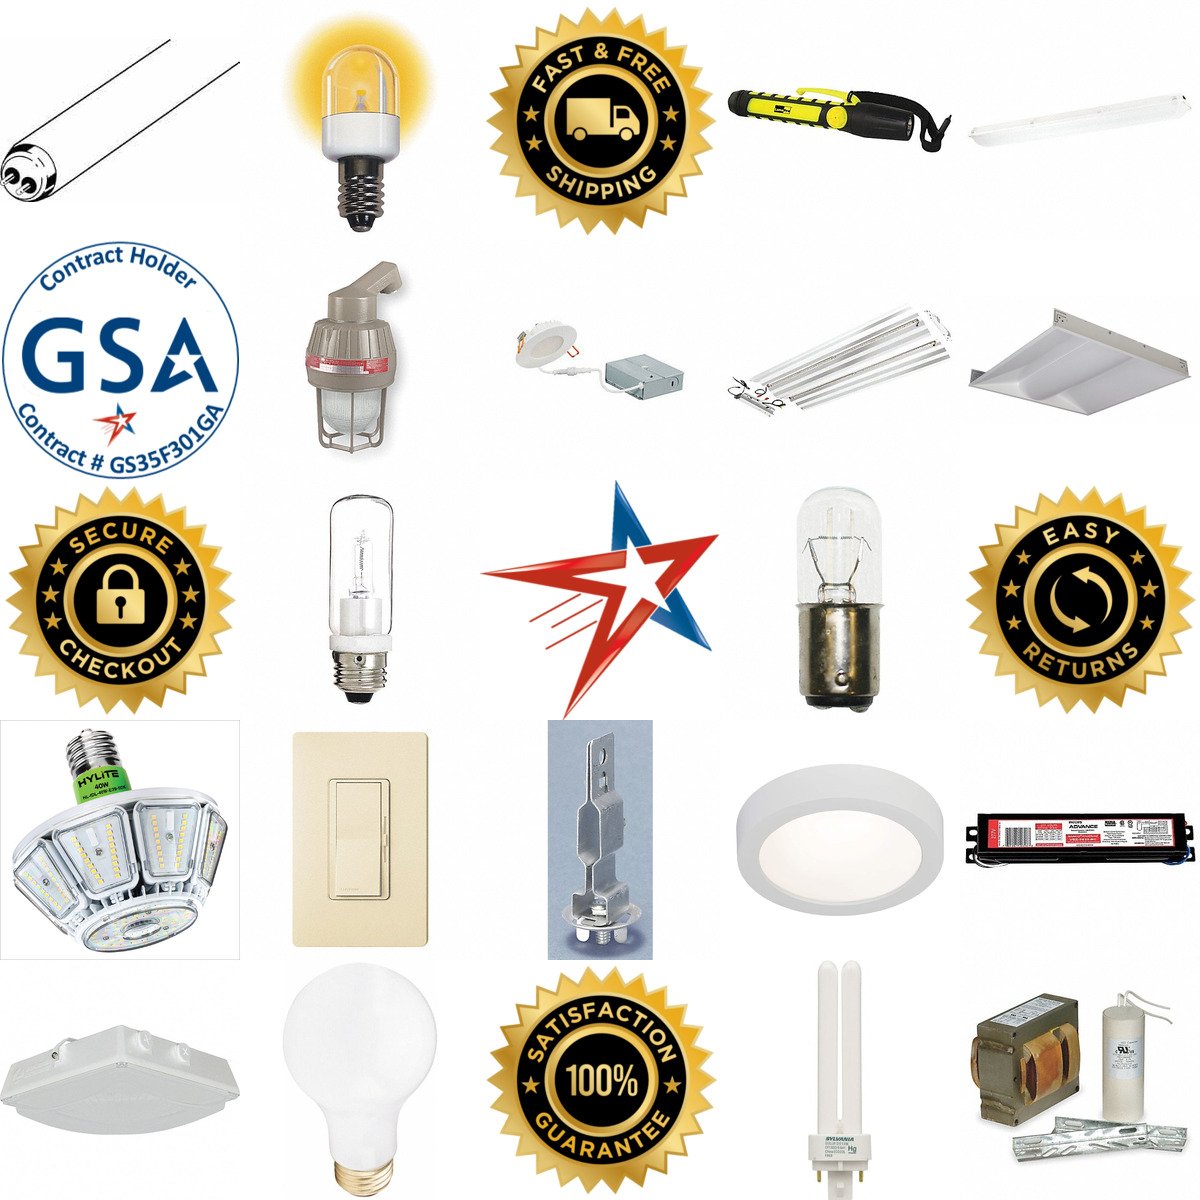 A selection of Lighting products on GoVets